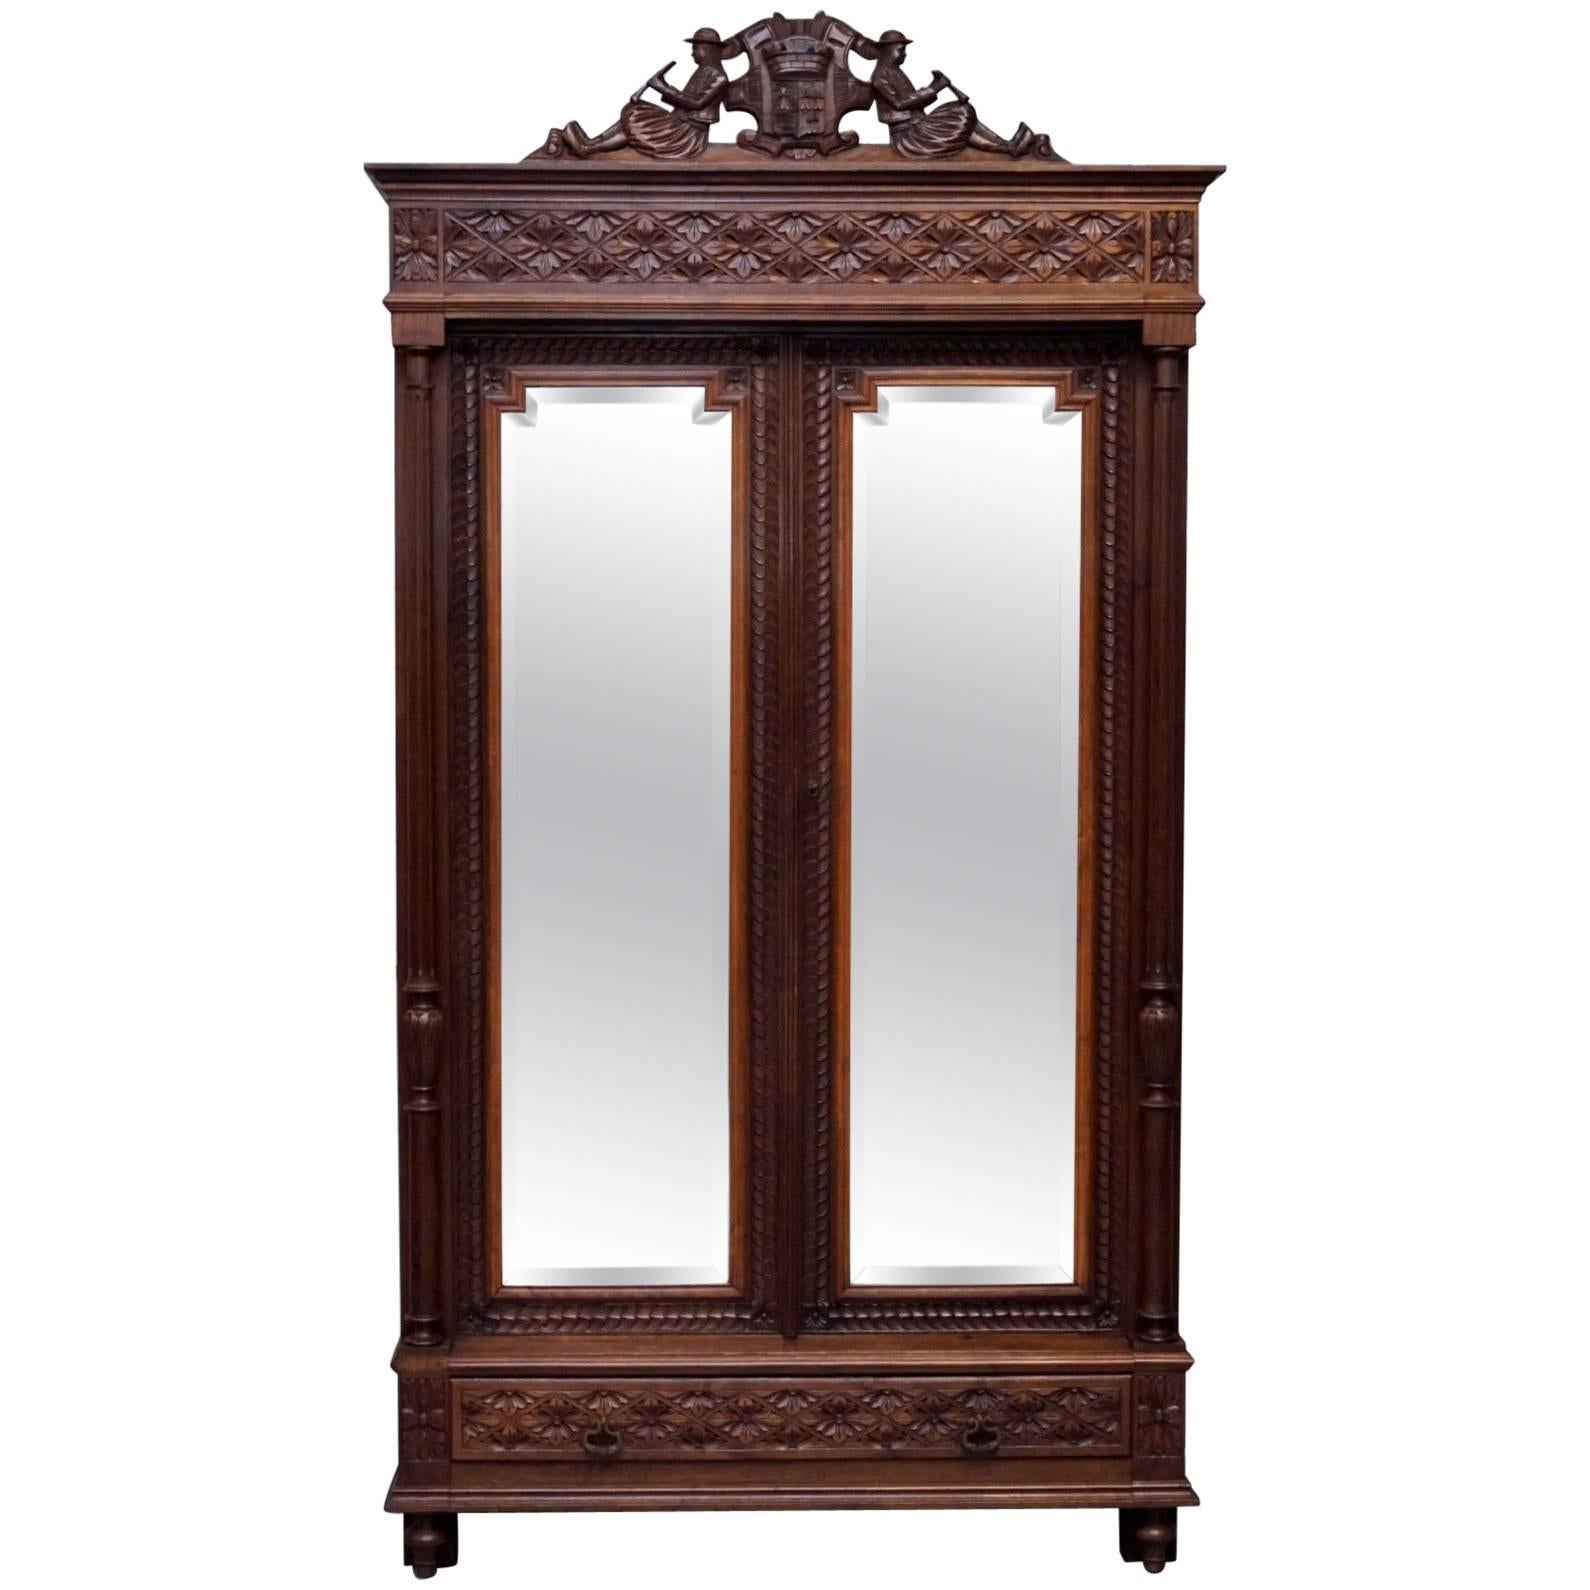 Stunning Hand-Carved Wood French Country Mirrored Double Door Armoire Wardrobe